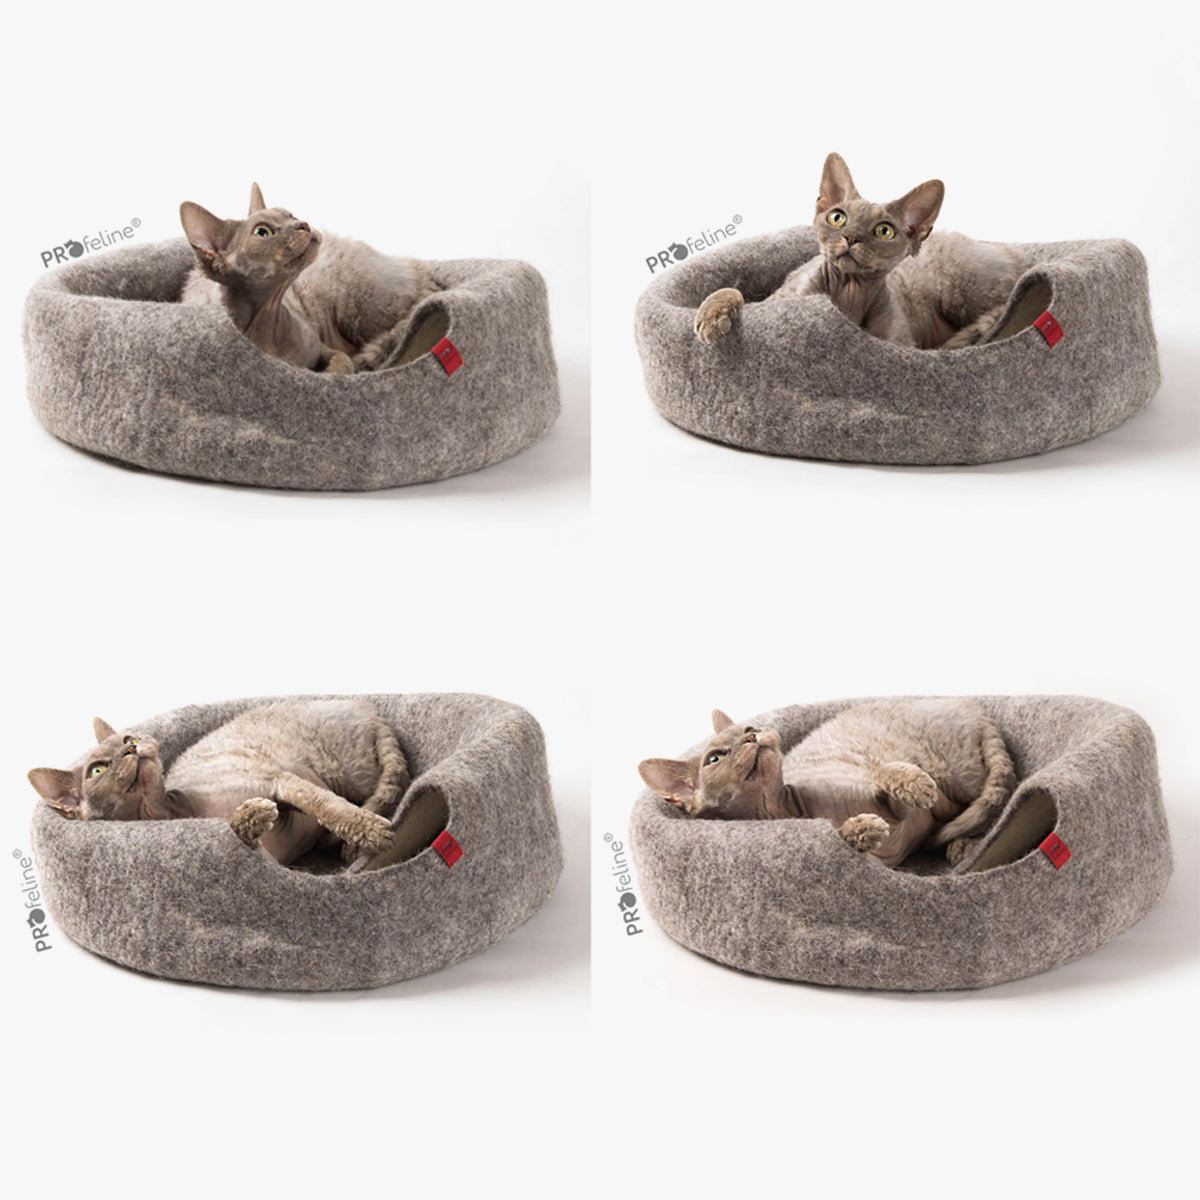 Profeline Plum-Style Cat Bed Cave, In Grey Colour | at Made Moggie